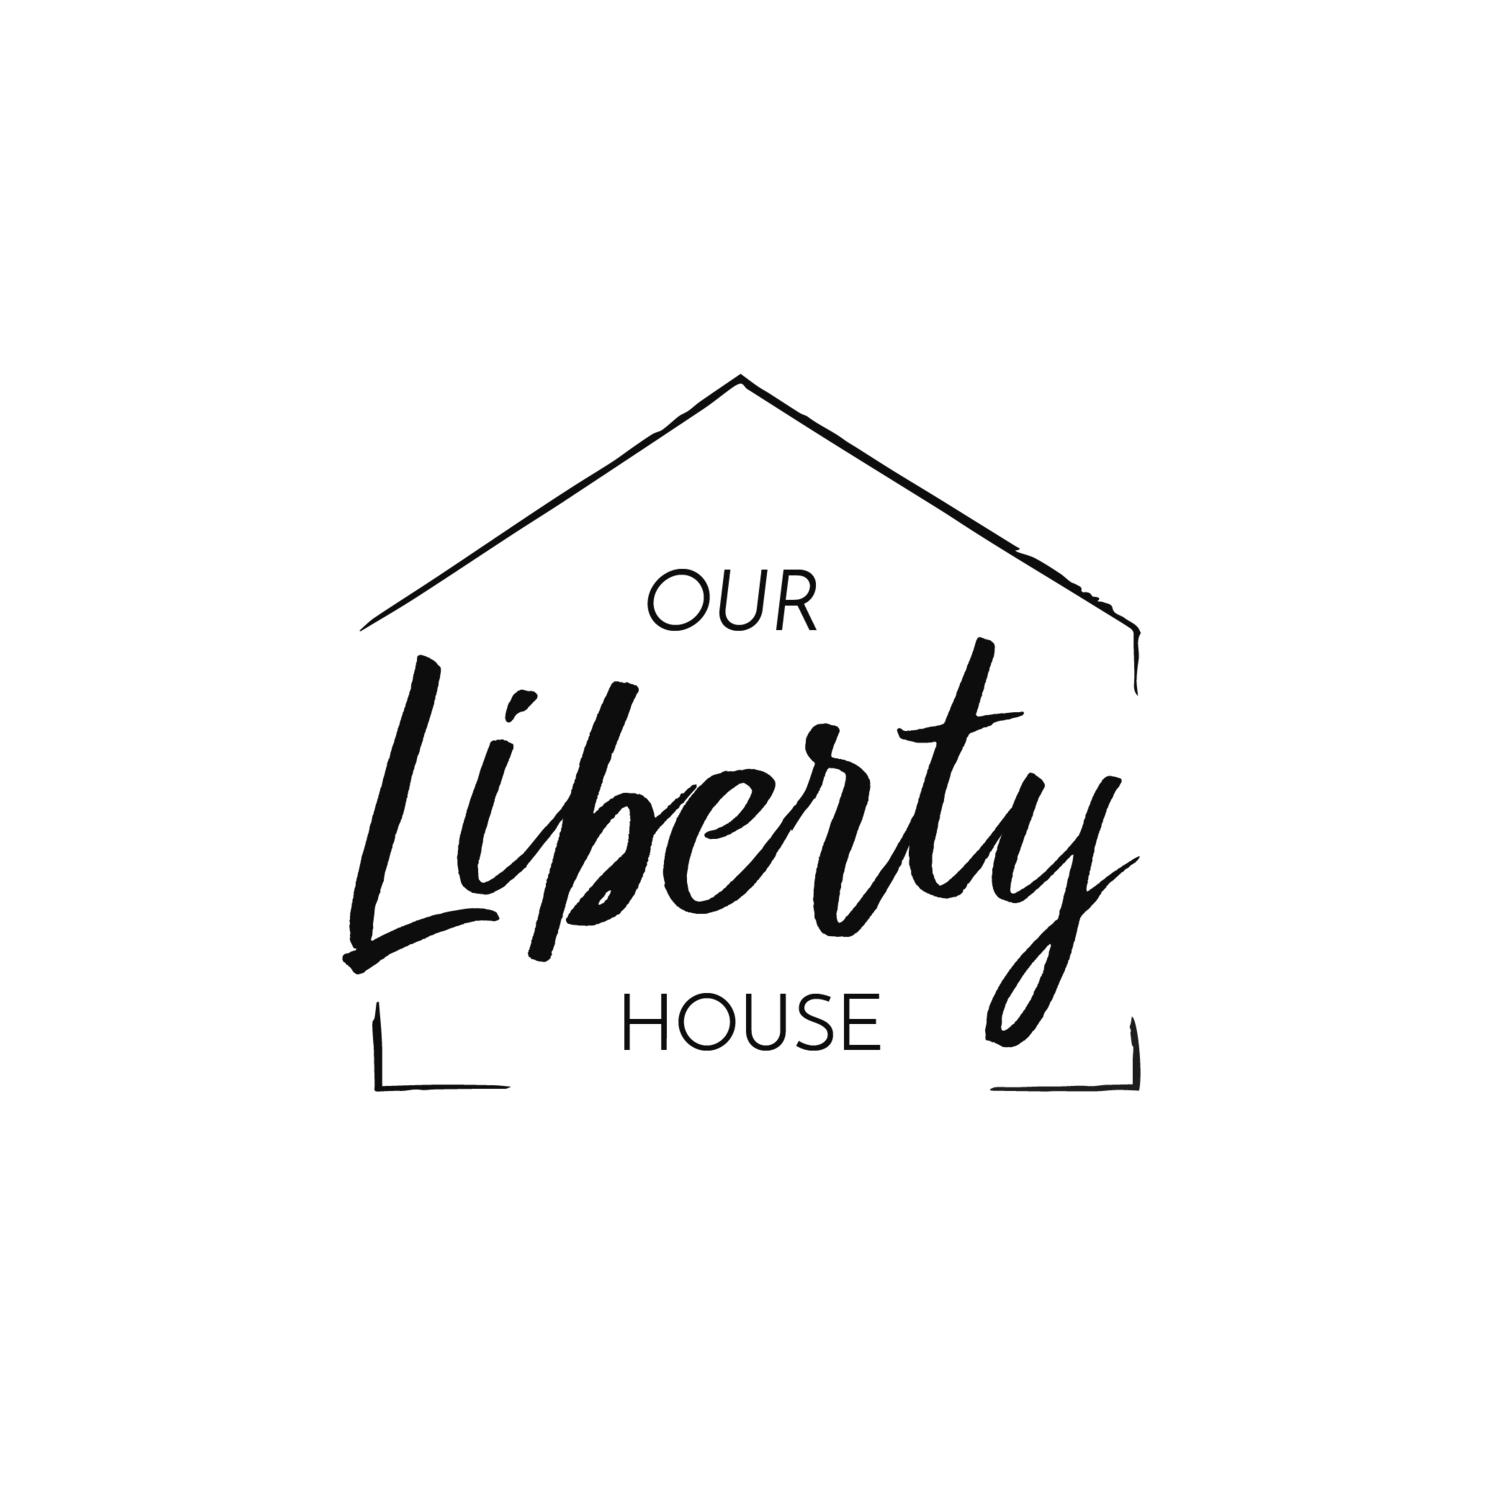 Our Liberty House